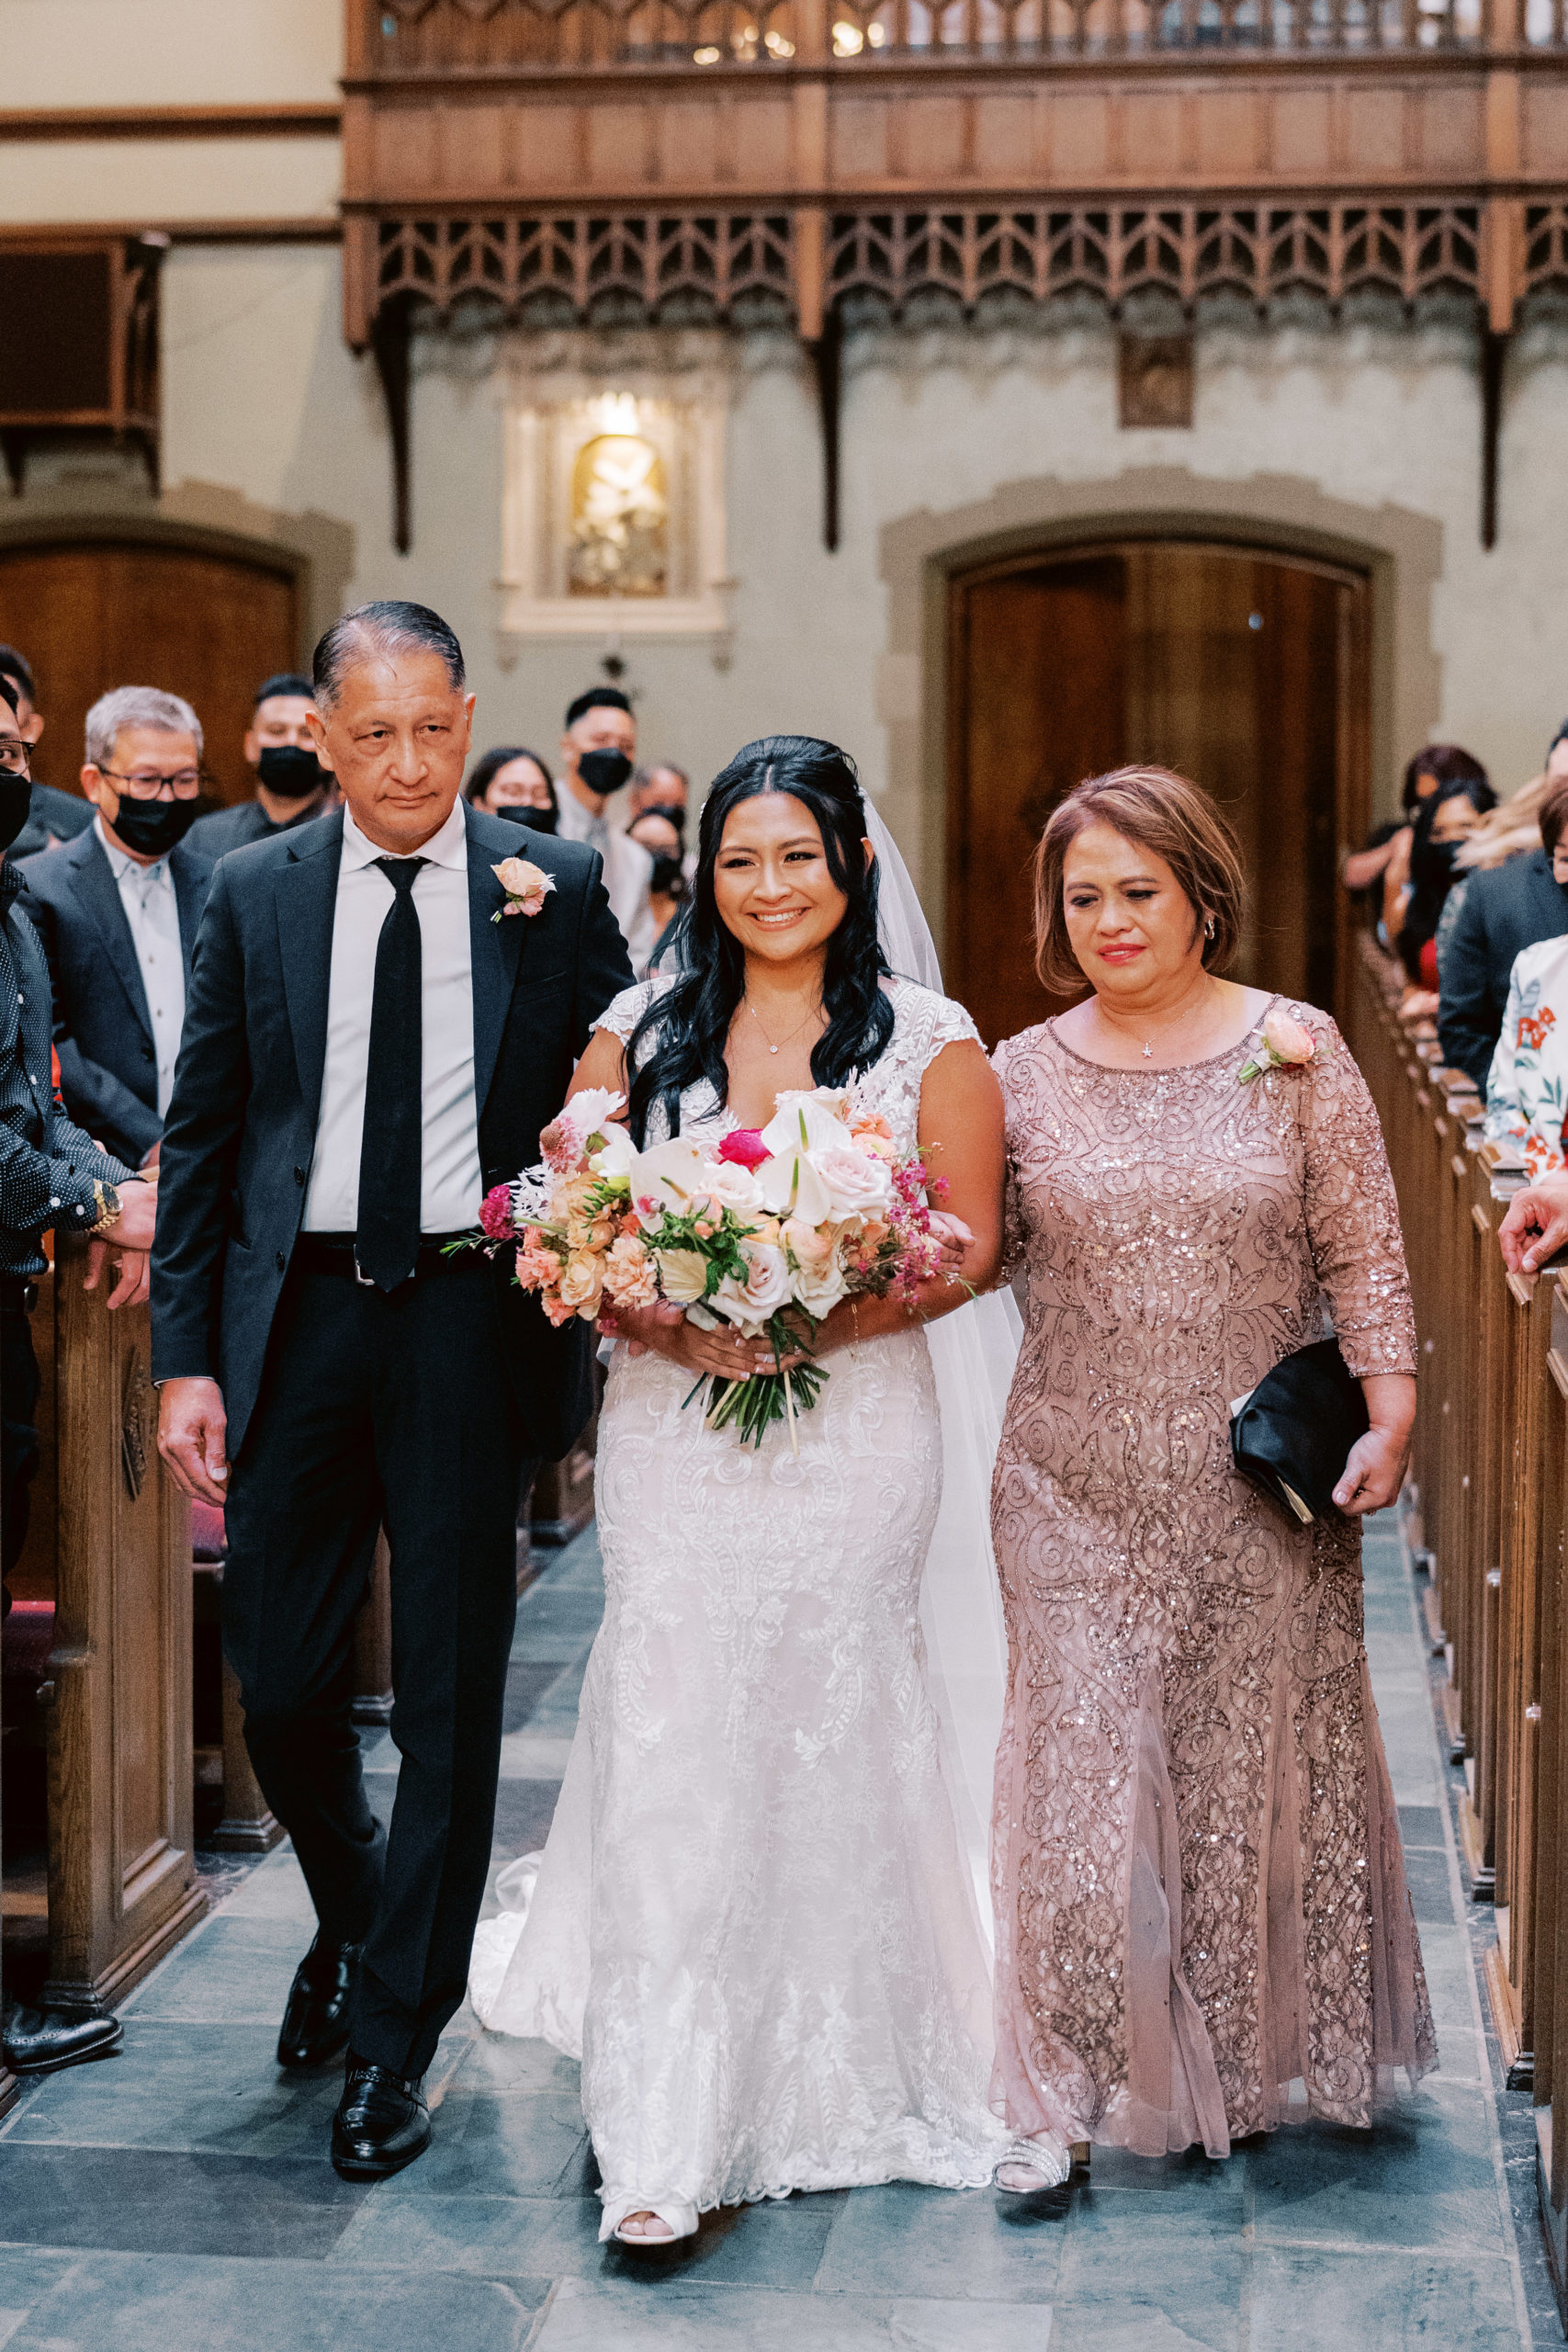 bride with mother and father walks down aisle in church wedding ceremony